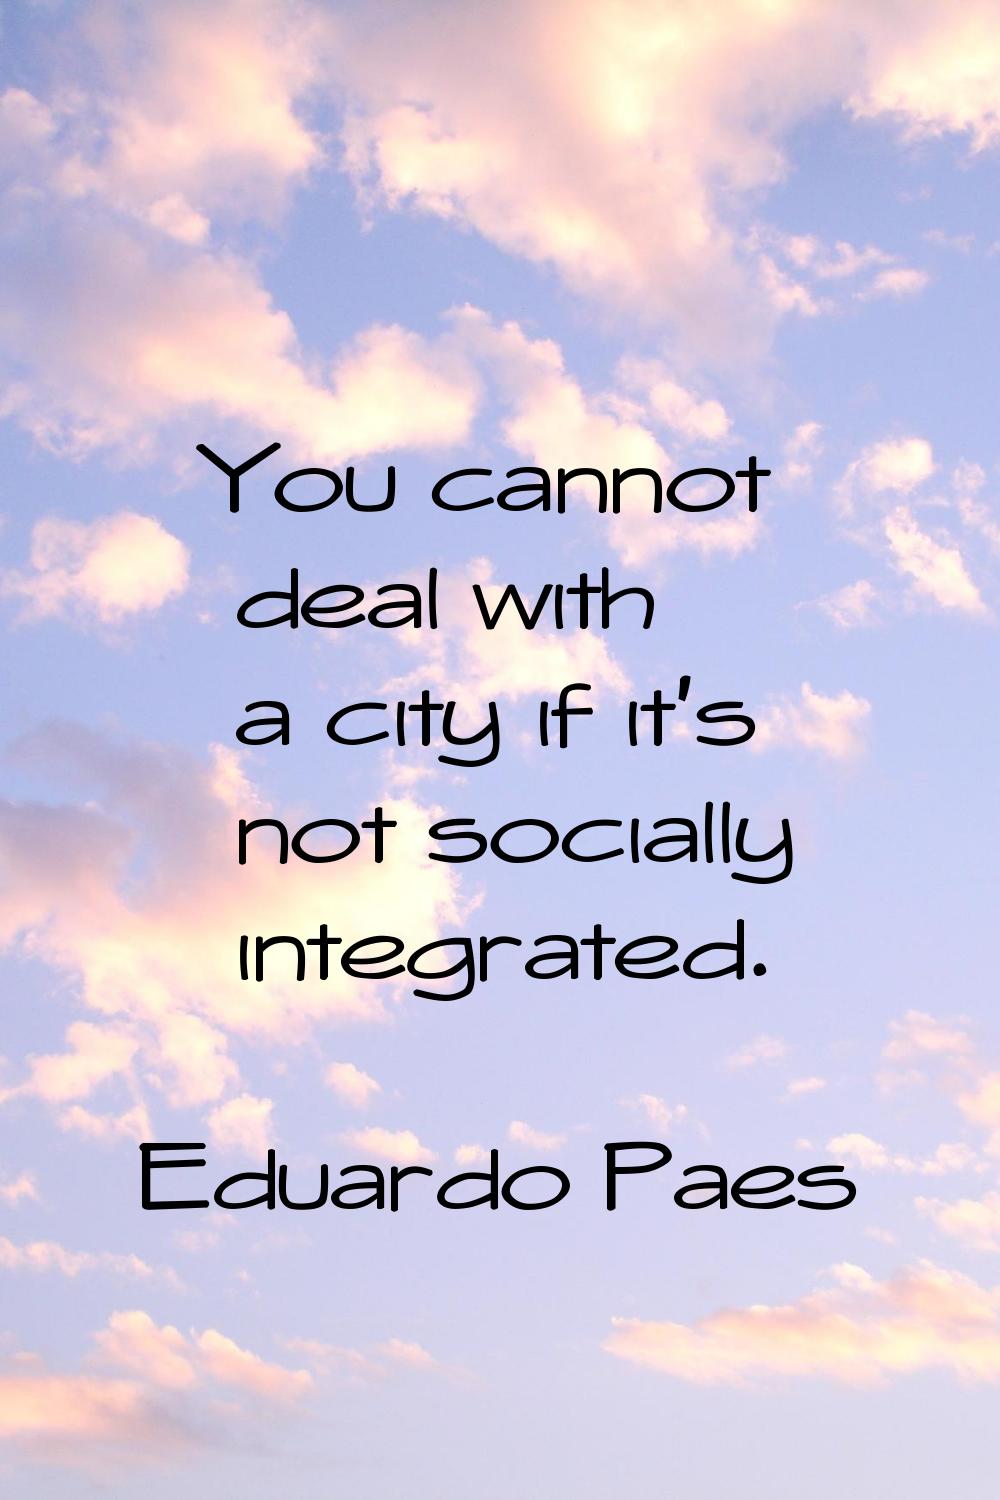 You cannot deal with a city if it's not socially integrated.